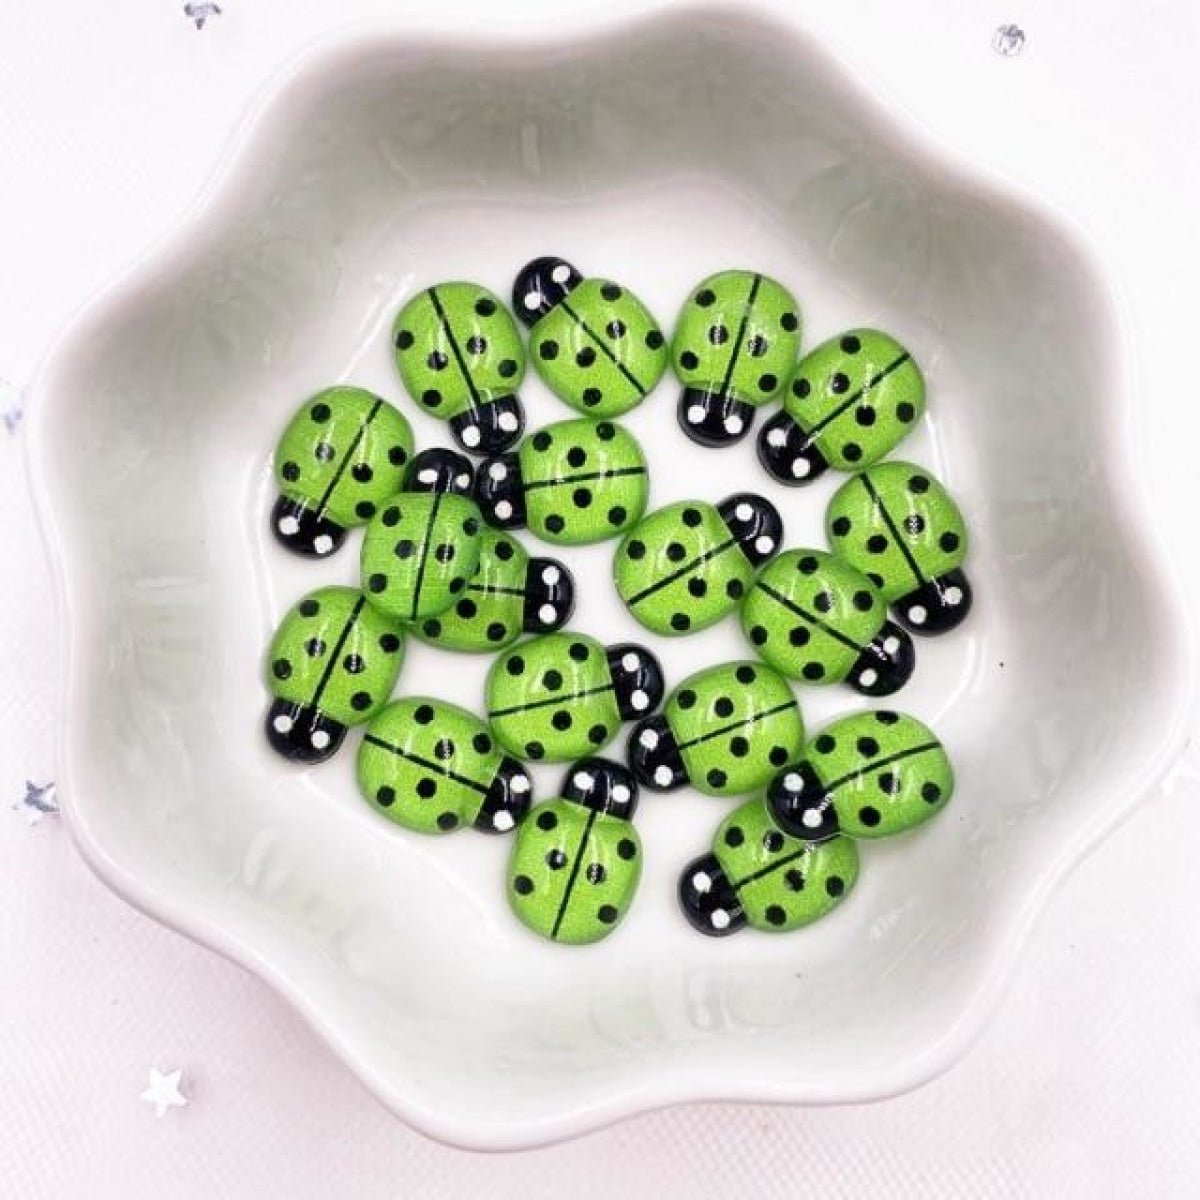 50pcs Bee Resin Flat Back Mini DIY Scrapbooking Crafts Home Decorations Resin Shape - Green - - Asia Sell